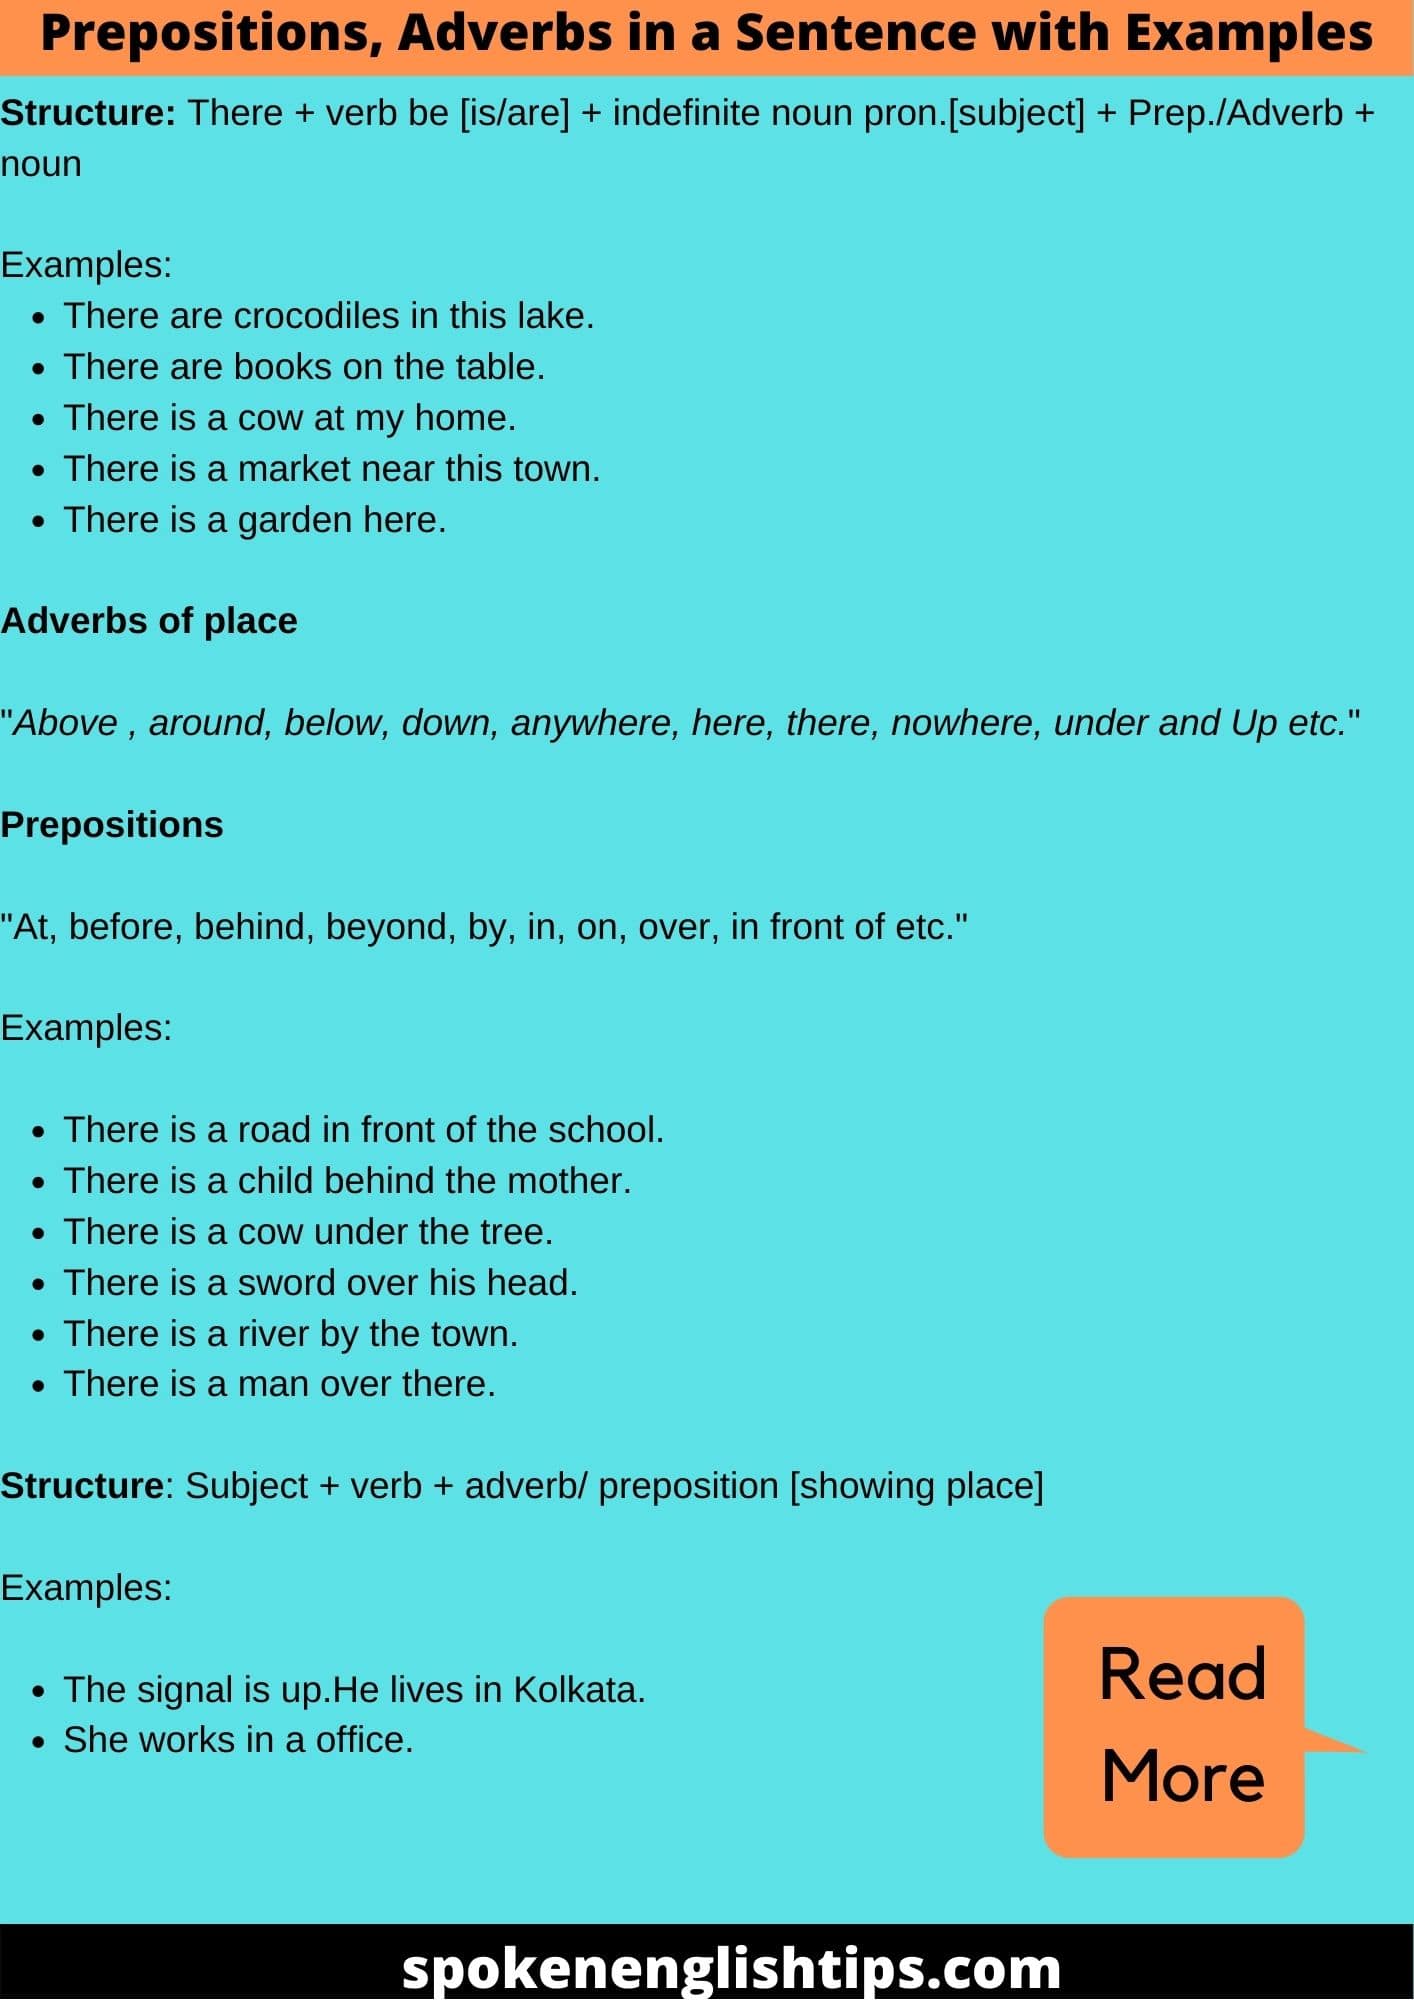 use-of-prepositions-adverbs-in-a-sentence-with-examples